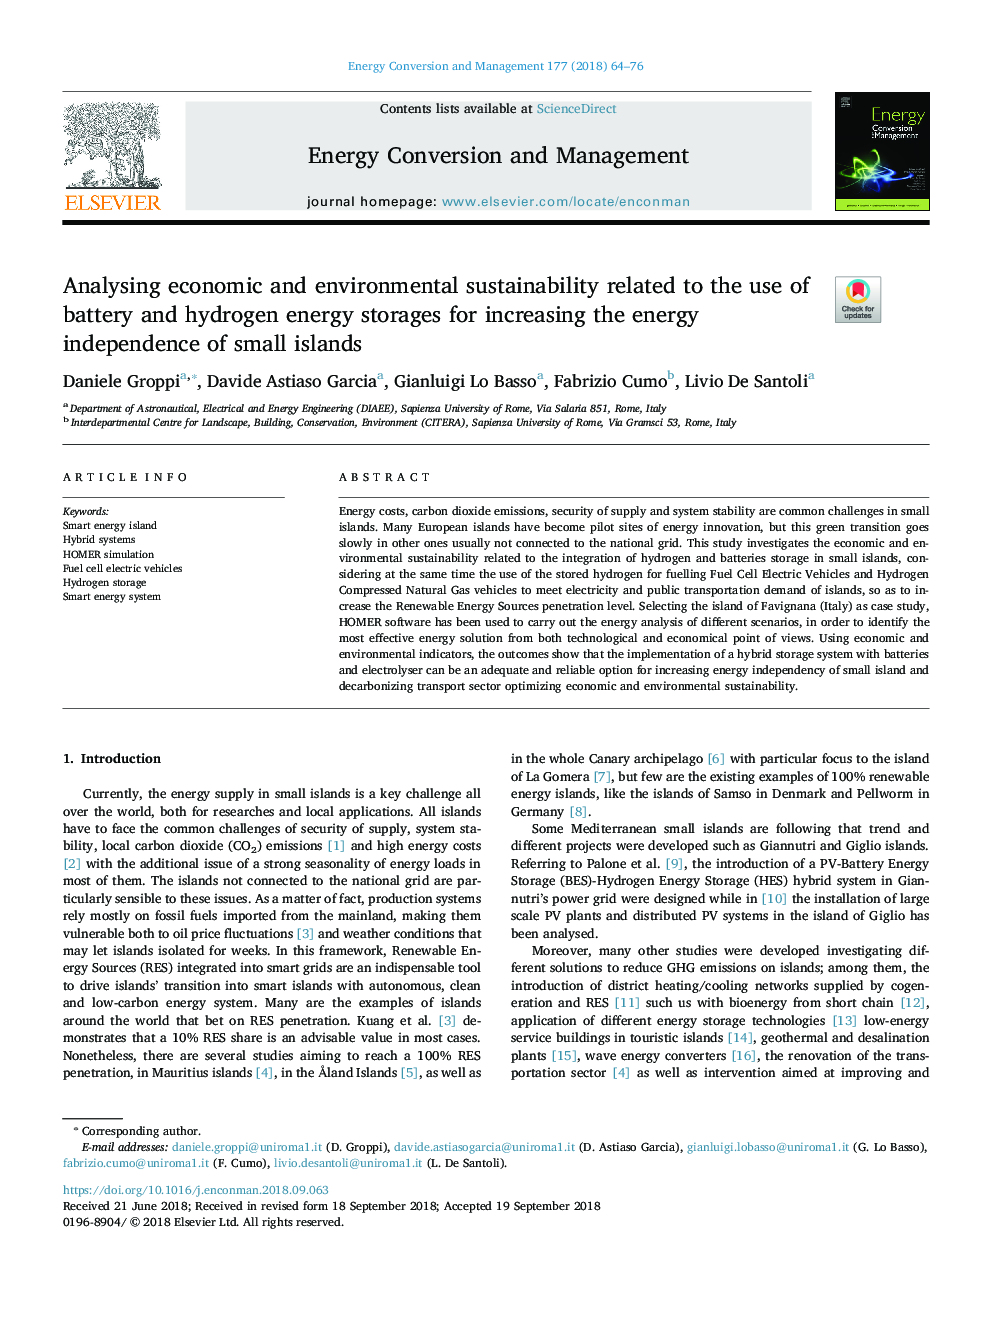 Analysing economic and environmental sustainability related to the use of battery and hydrogen energy storages for increasing the energy independence of small islands